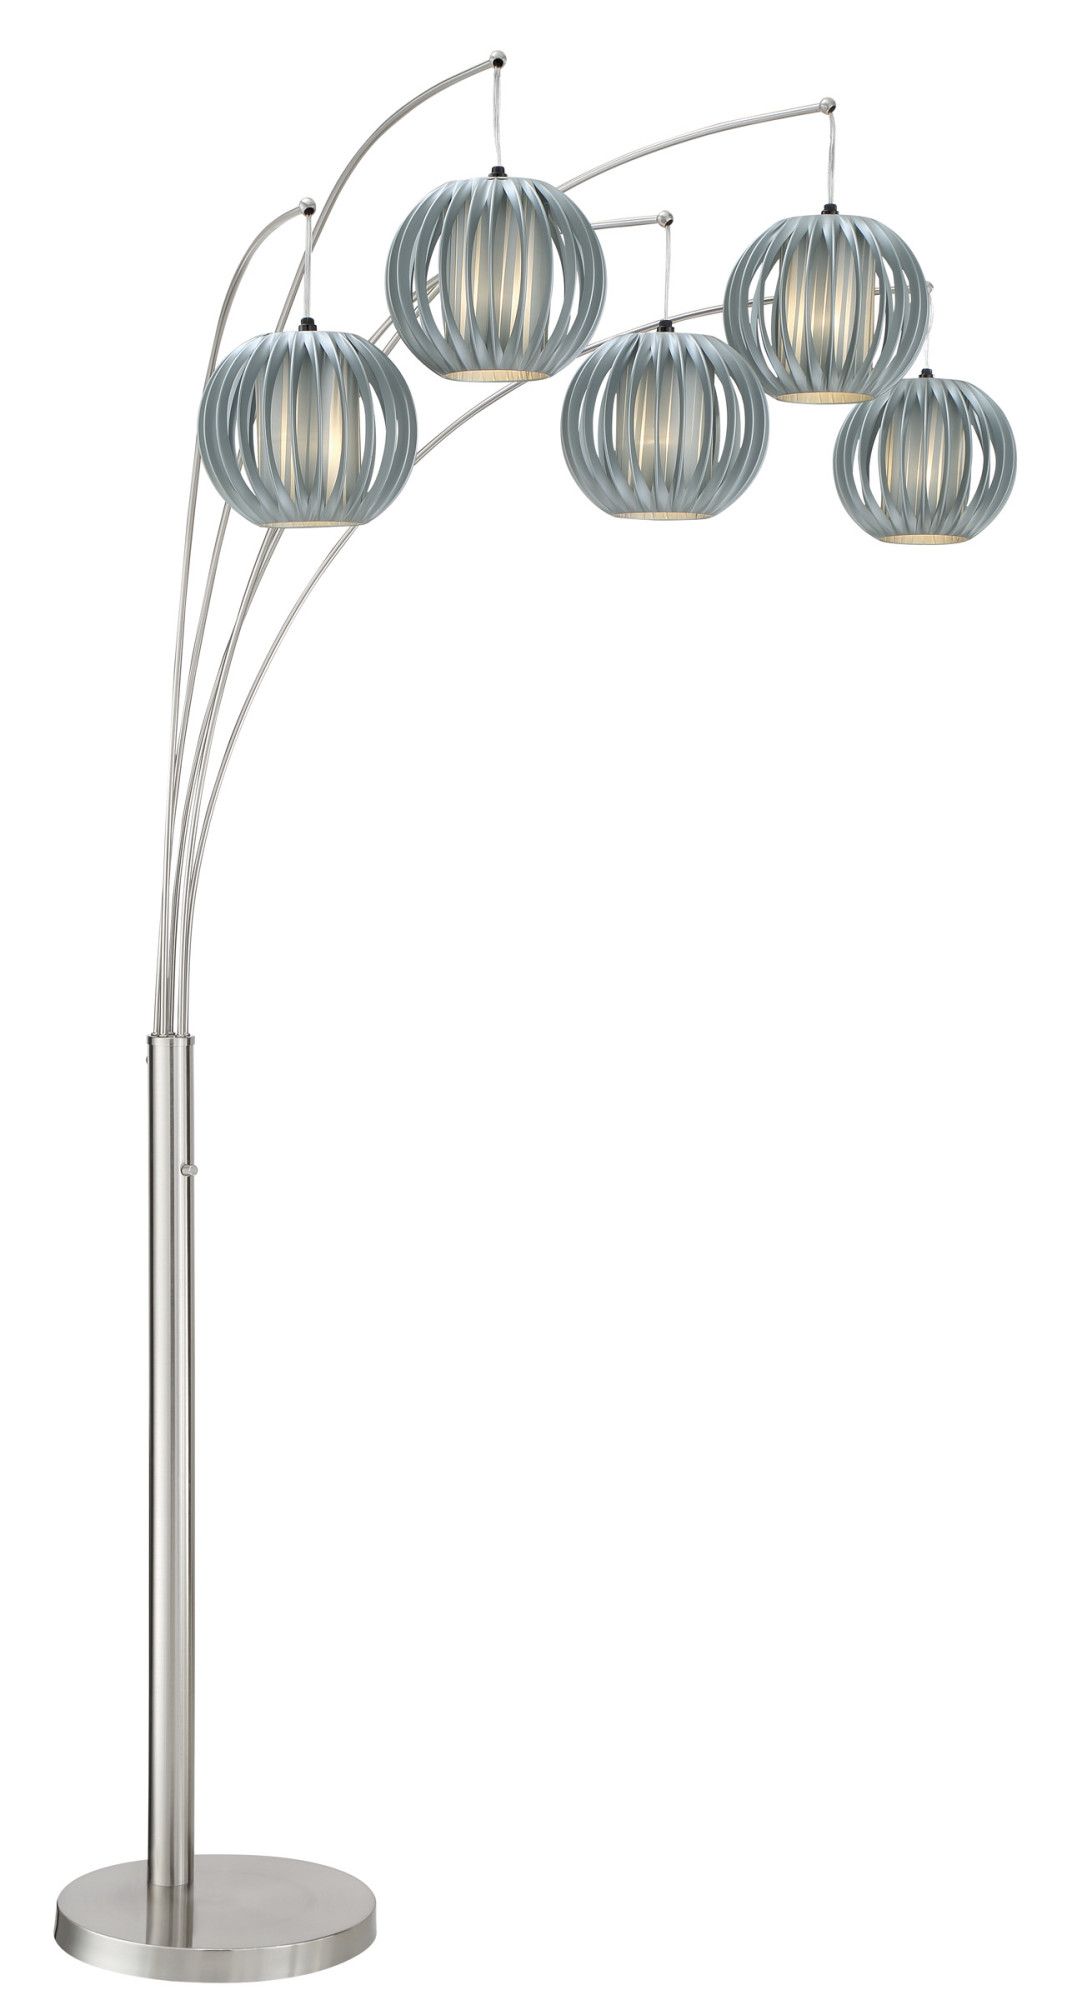 Lite Source Ls 8872 Deion 5 Light 90" Tall Arc And Tree Floor Lamp – Grey –  Walmart Intended For 5 Light Arc Floor Lamps (View 13 of 15)